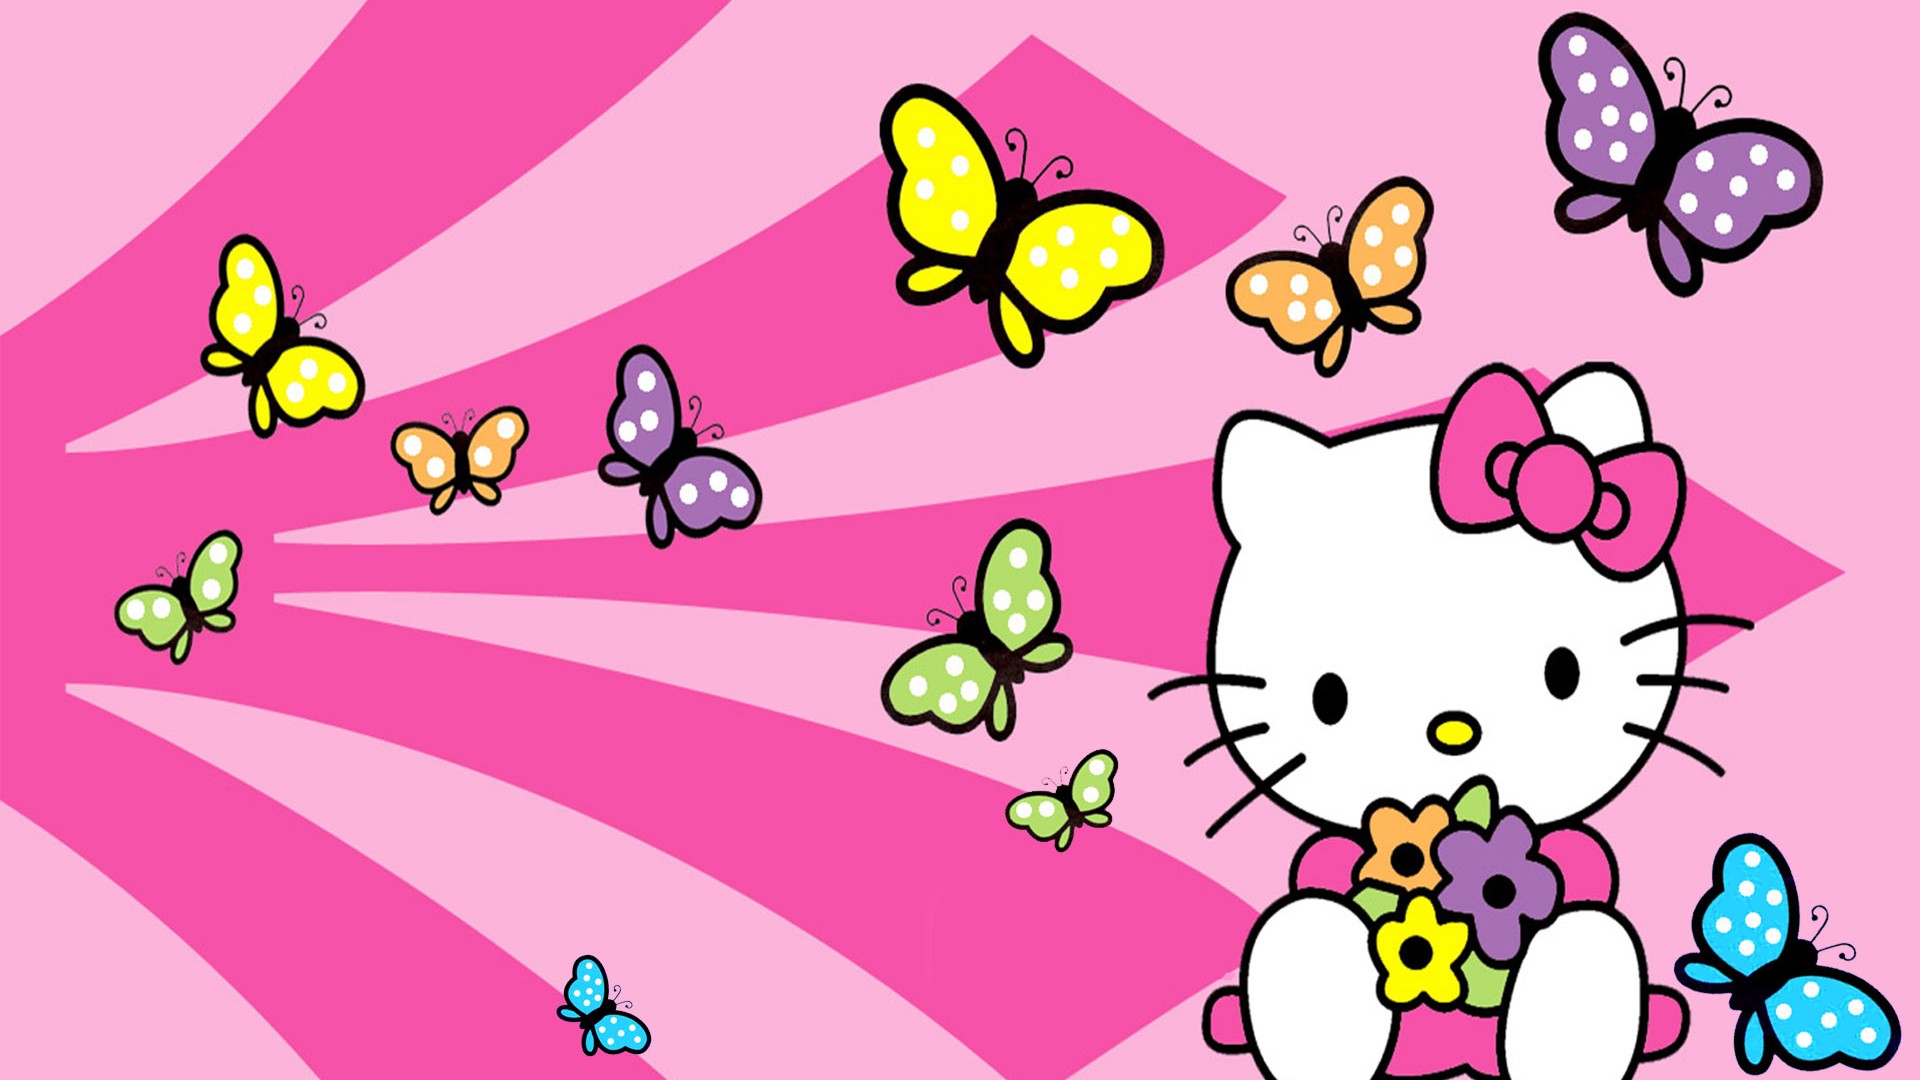 Hd Wallpaper Sanrio Hello Kitty 2021 Live Wallpaper Hd Tons of awesome hello kitty desktop background wallpapers to download for free. hd wallpaper sanrio hello kitty 2021